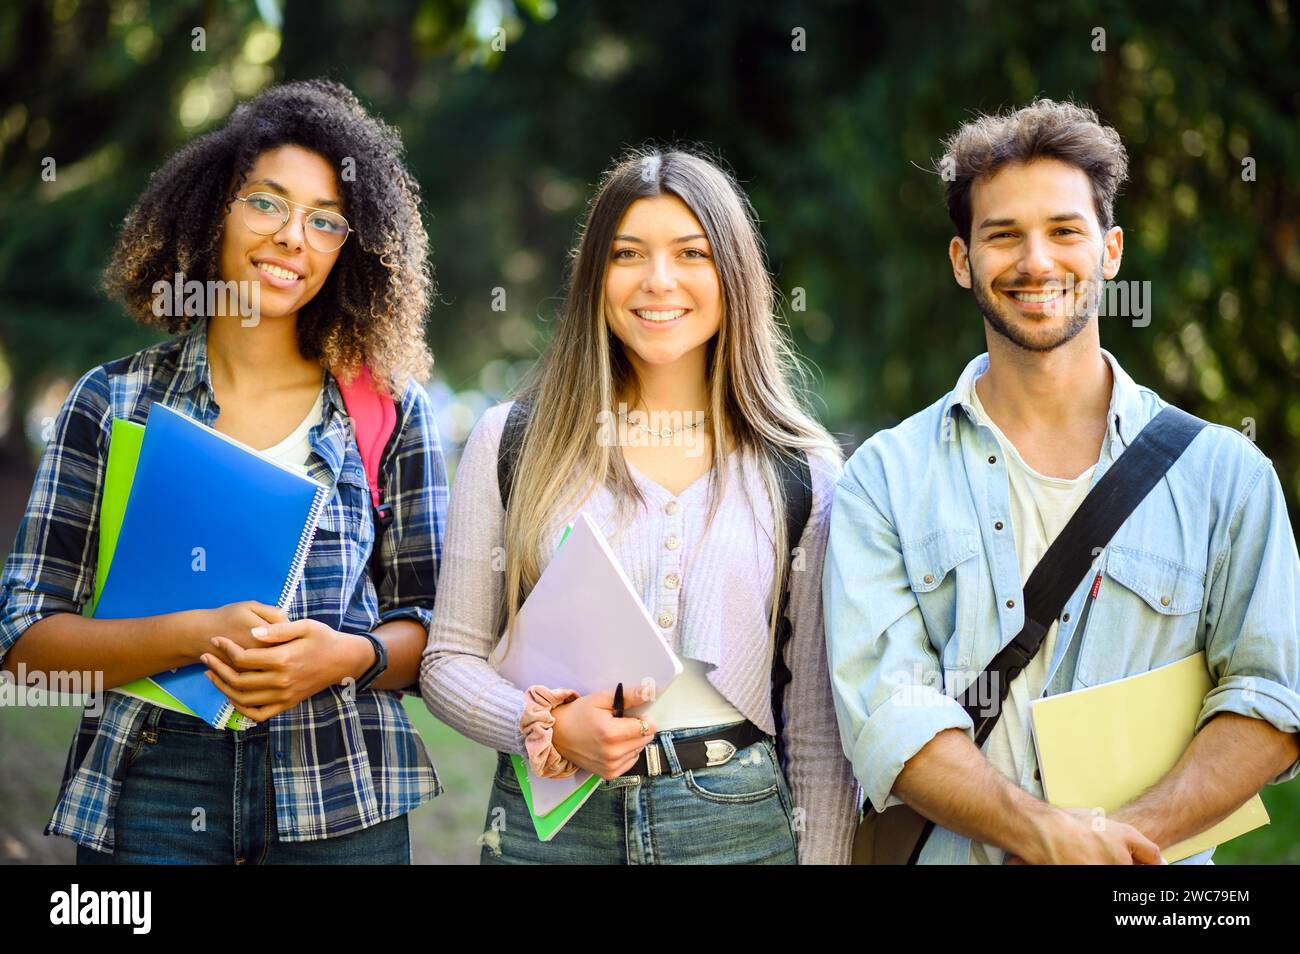 Happy multiethnic group of students smiling outdoor Stock Photo